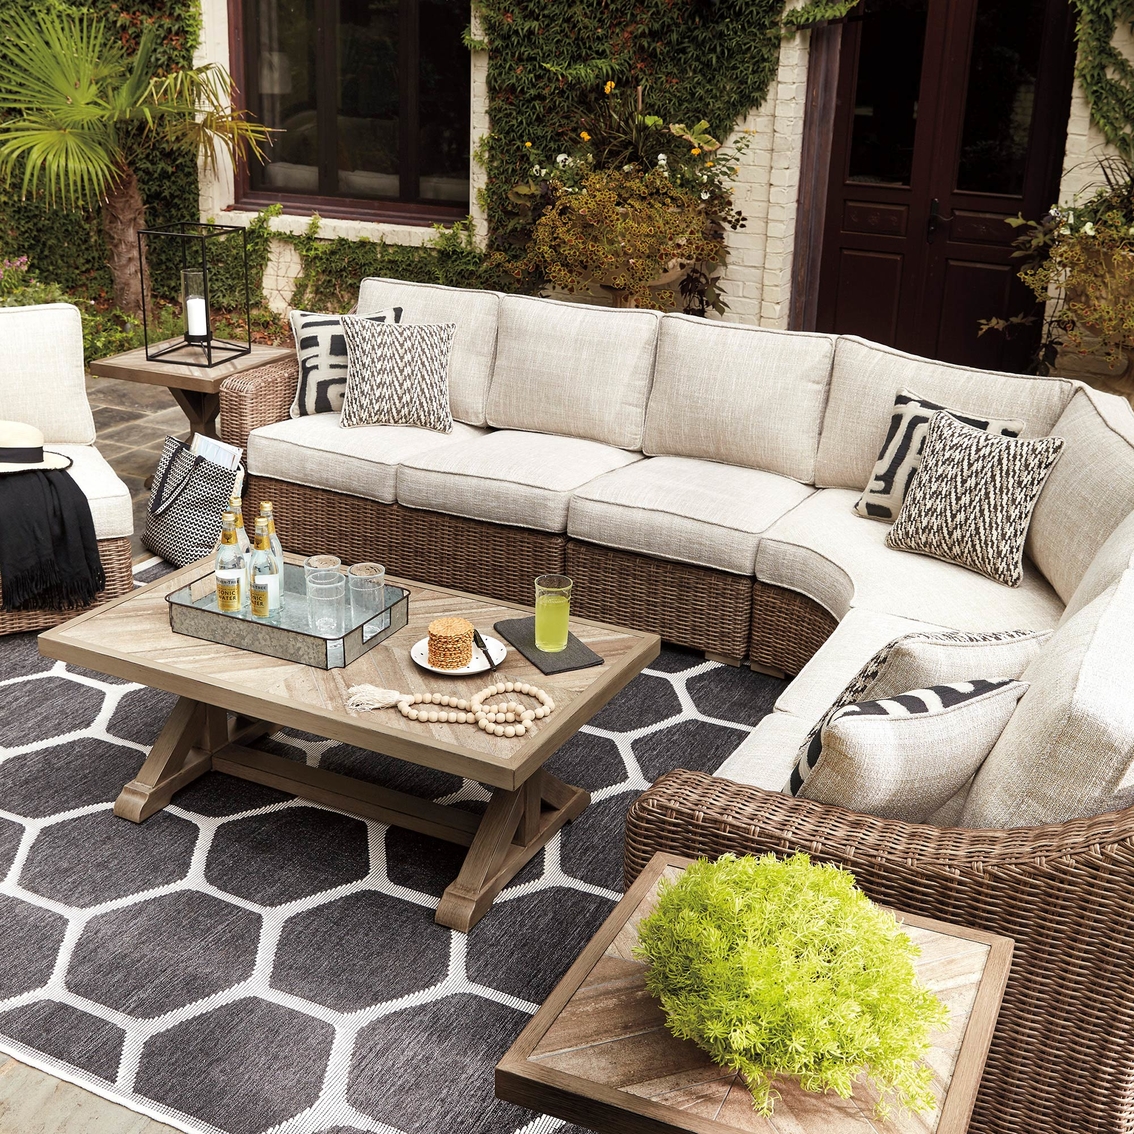 Signature Design by Ashley Beachcroft 3 pc. Outdoor Sectional - Image 7 of 7